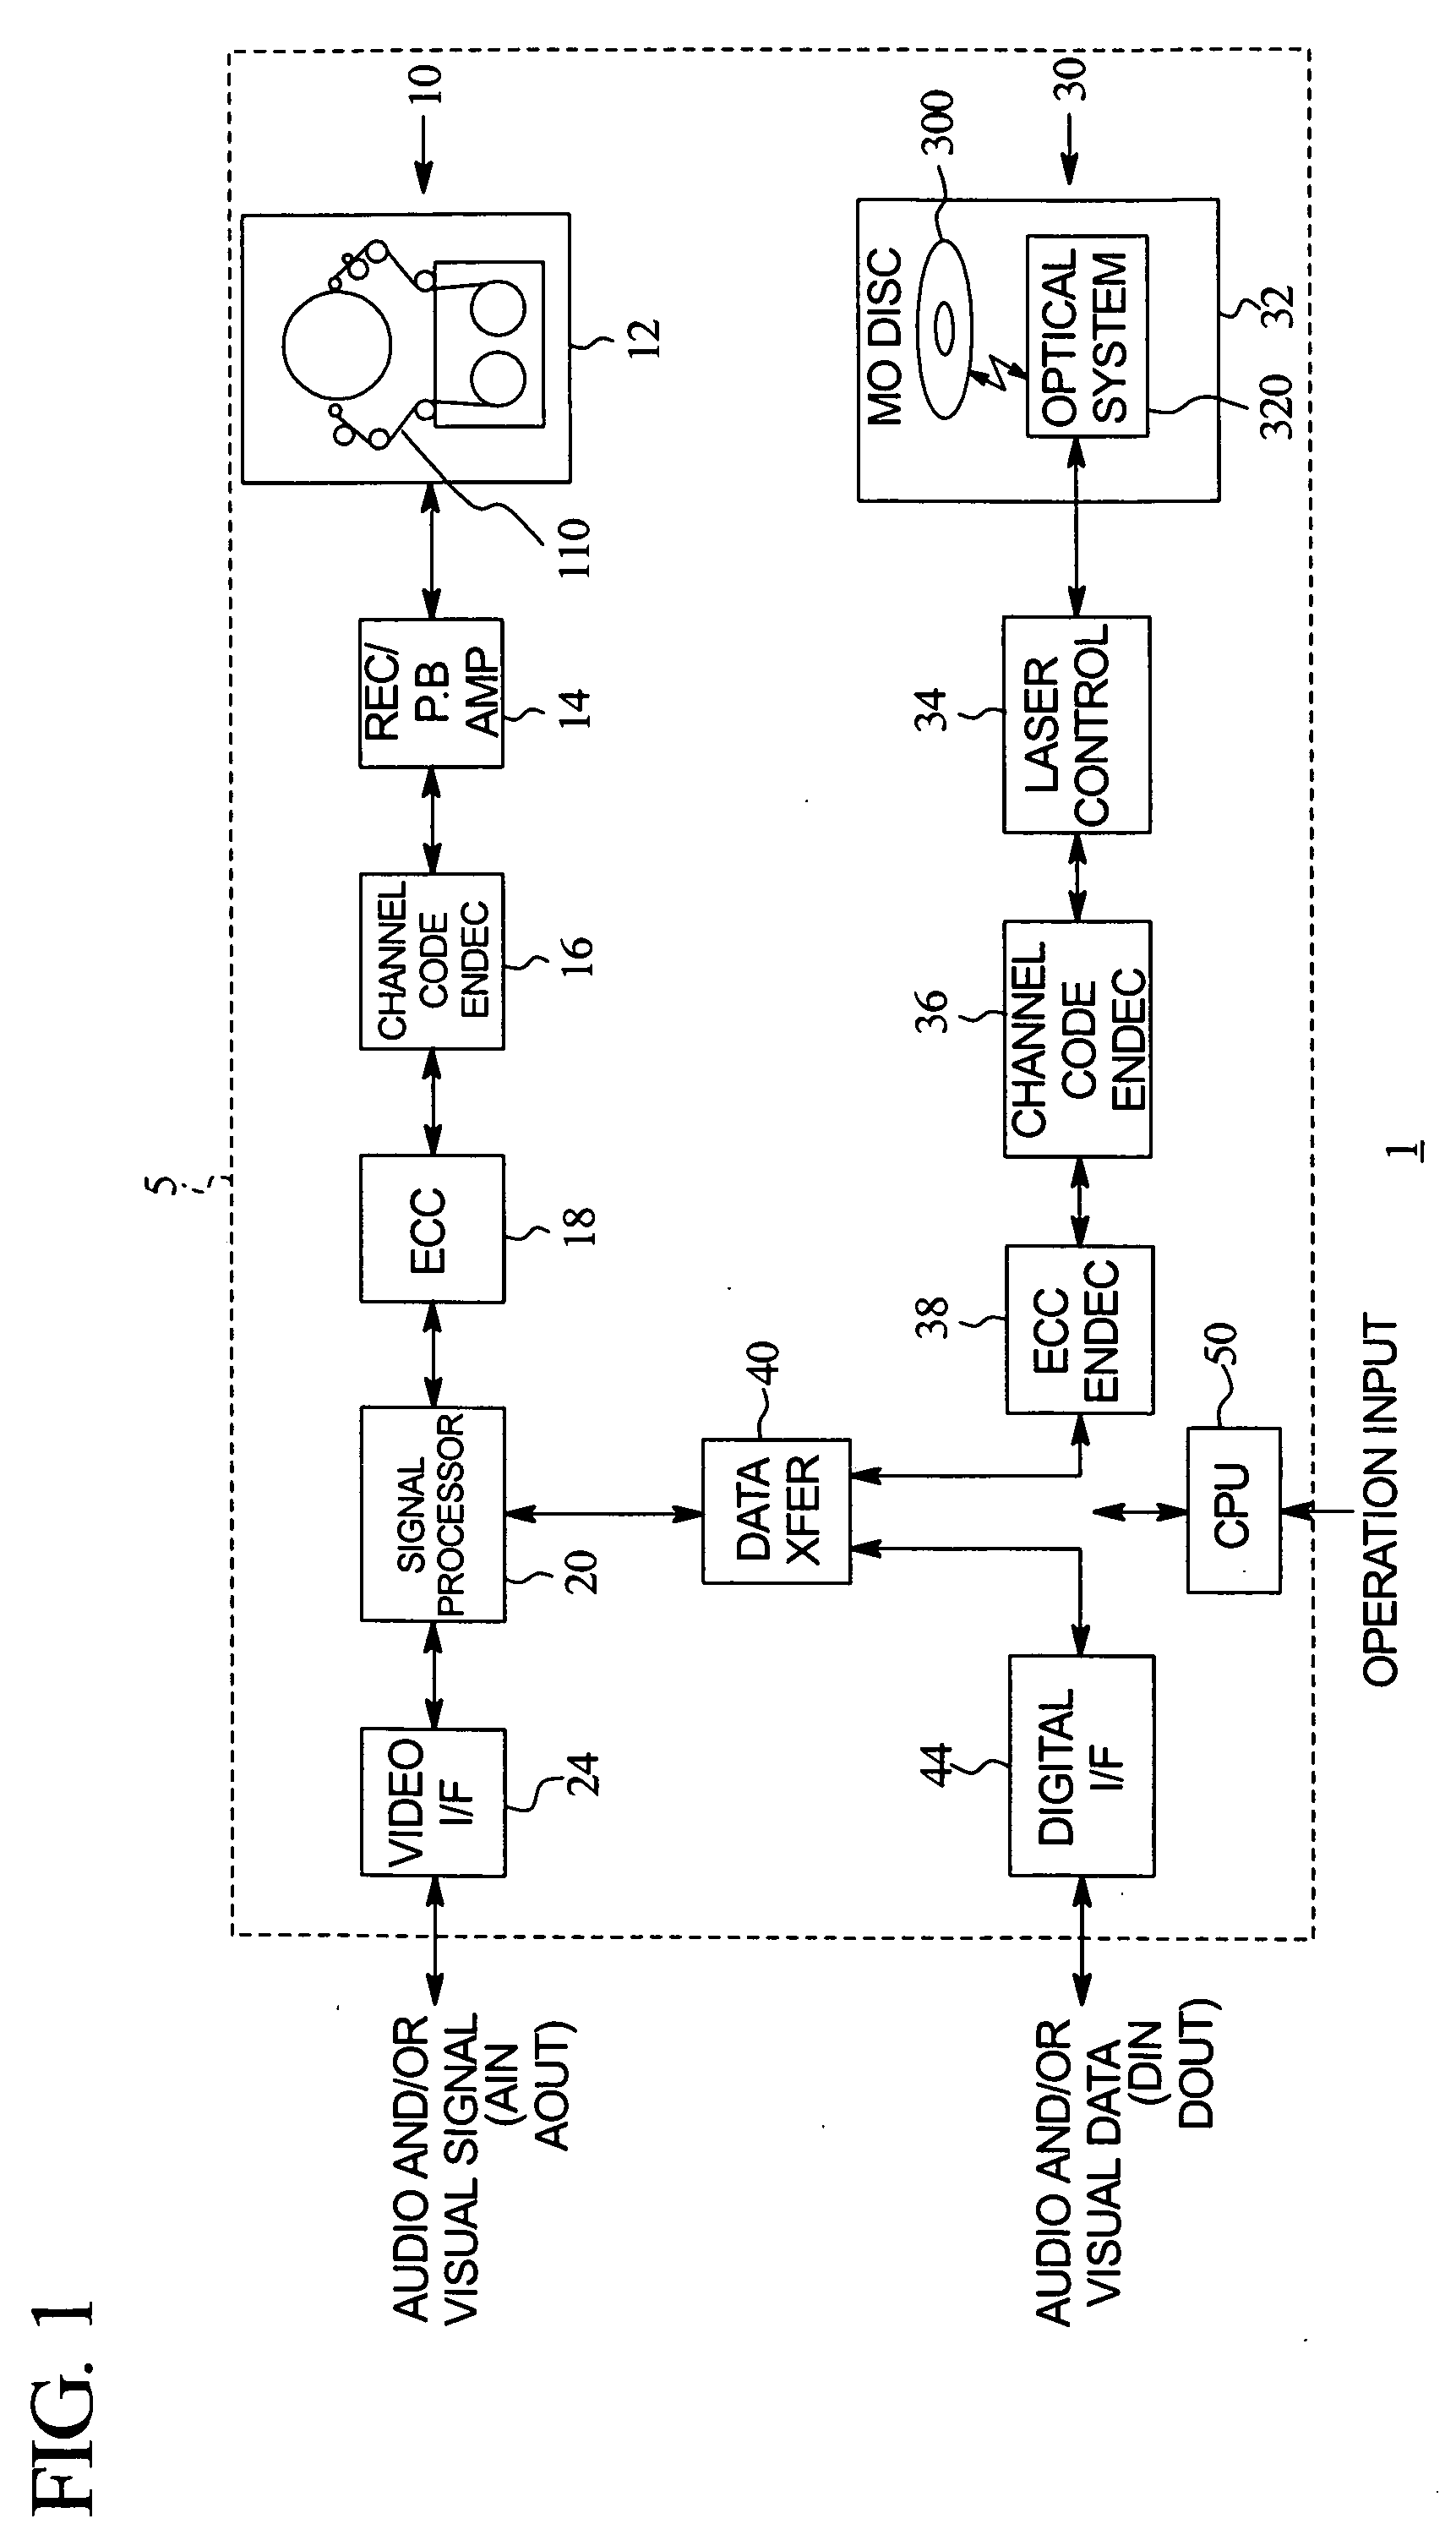 Data recording and reproducing apparatus having a data transfer device selectively transferring data between multiple data recording and reproducing devices